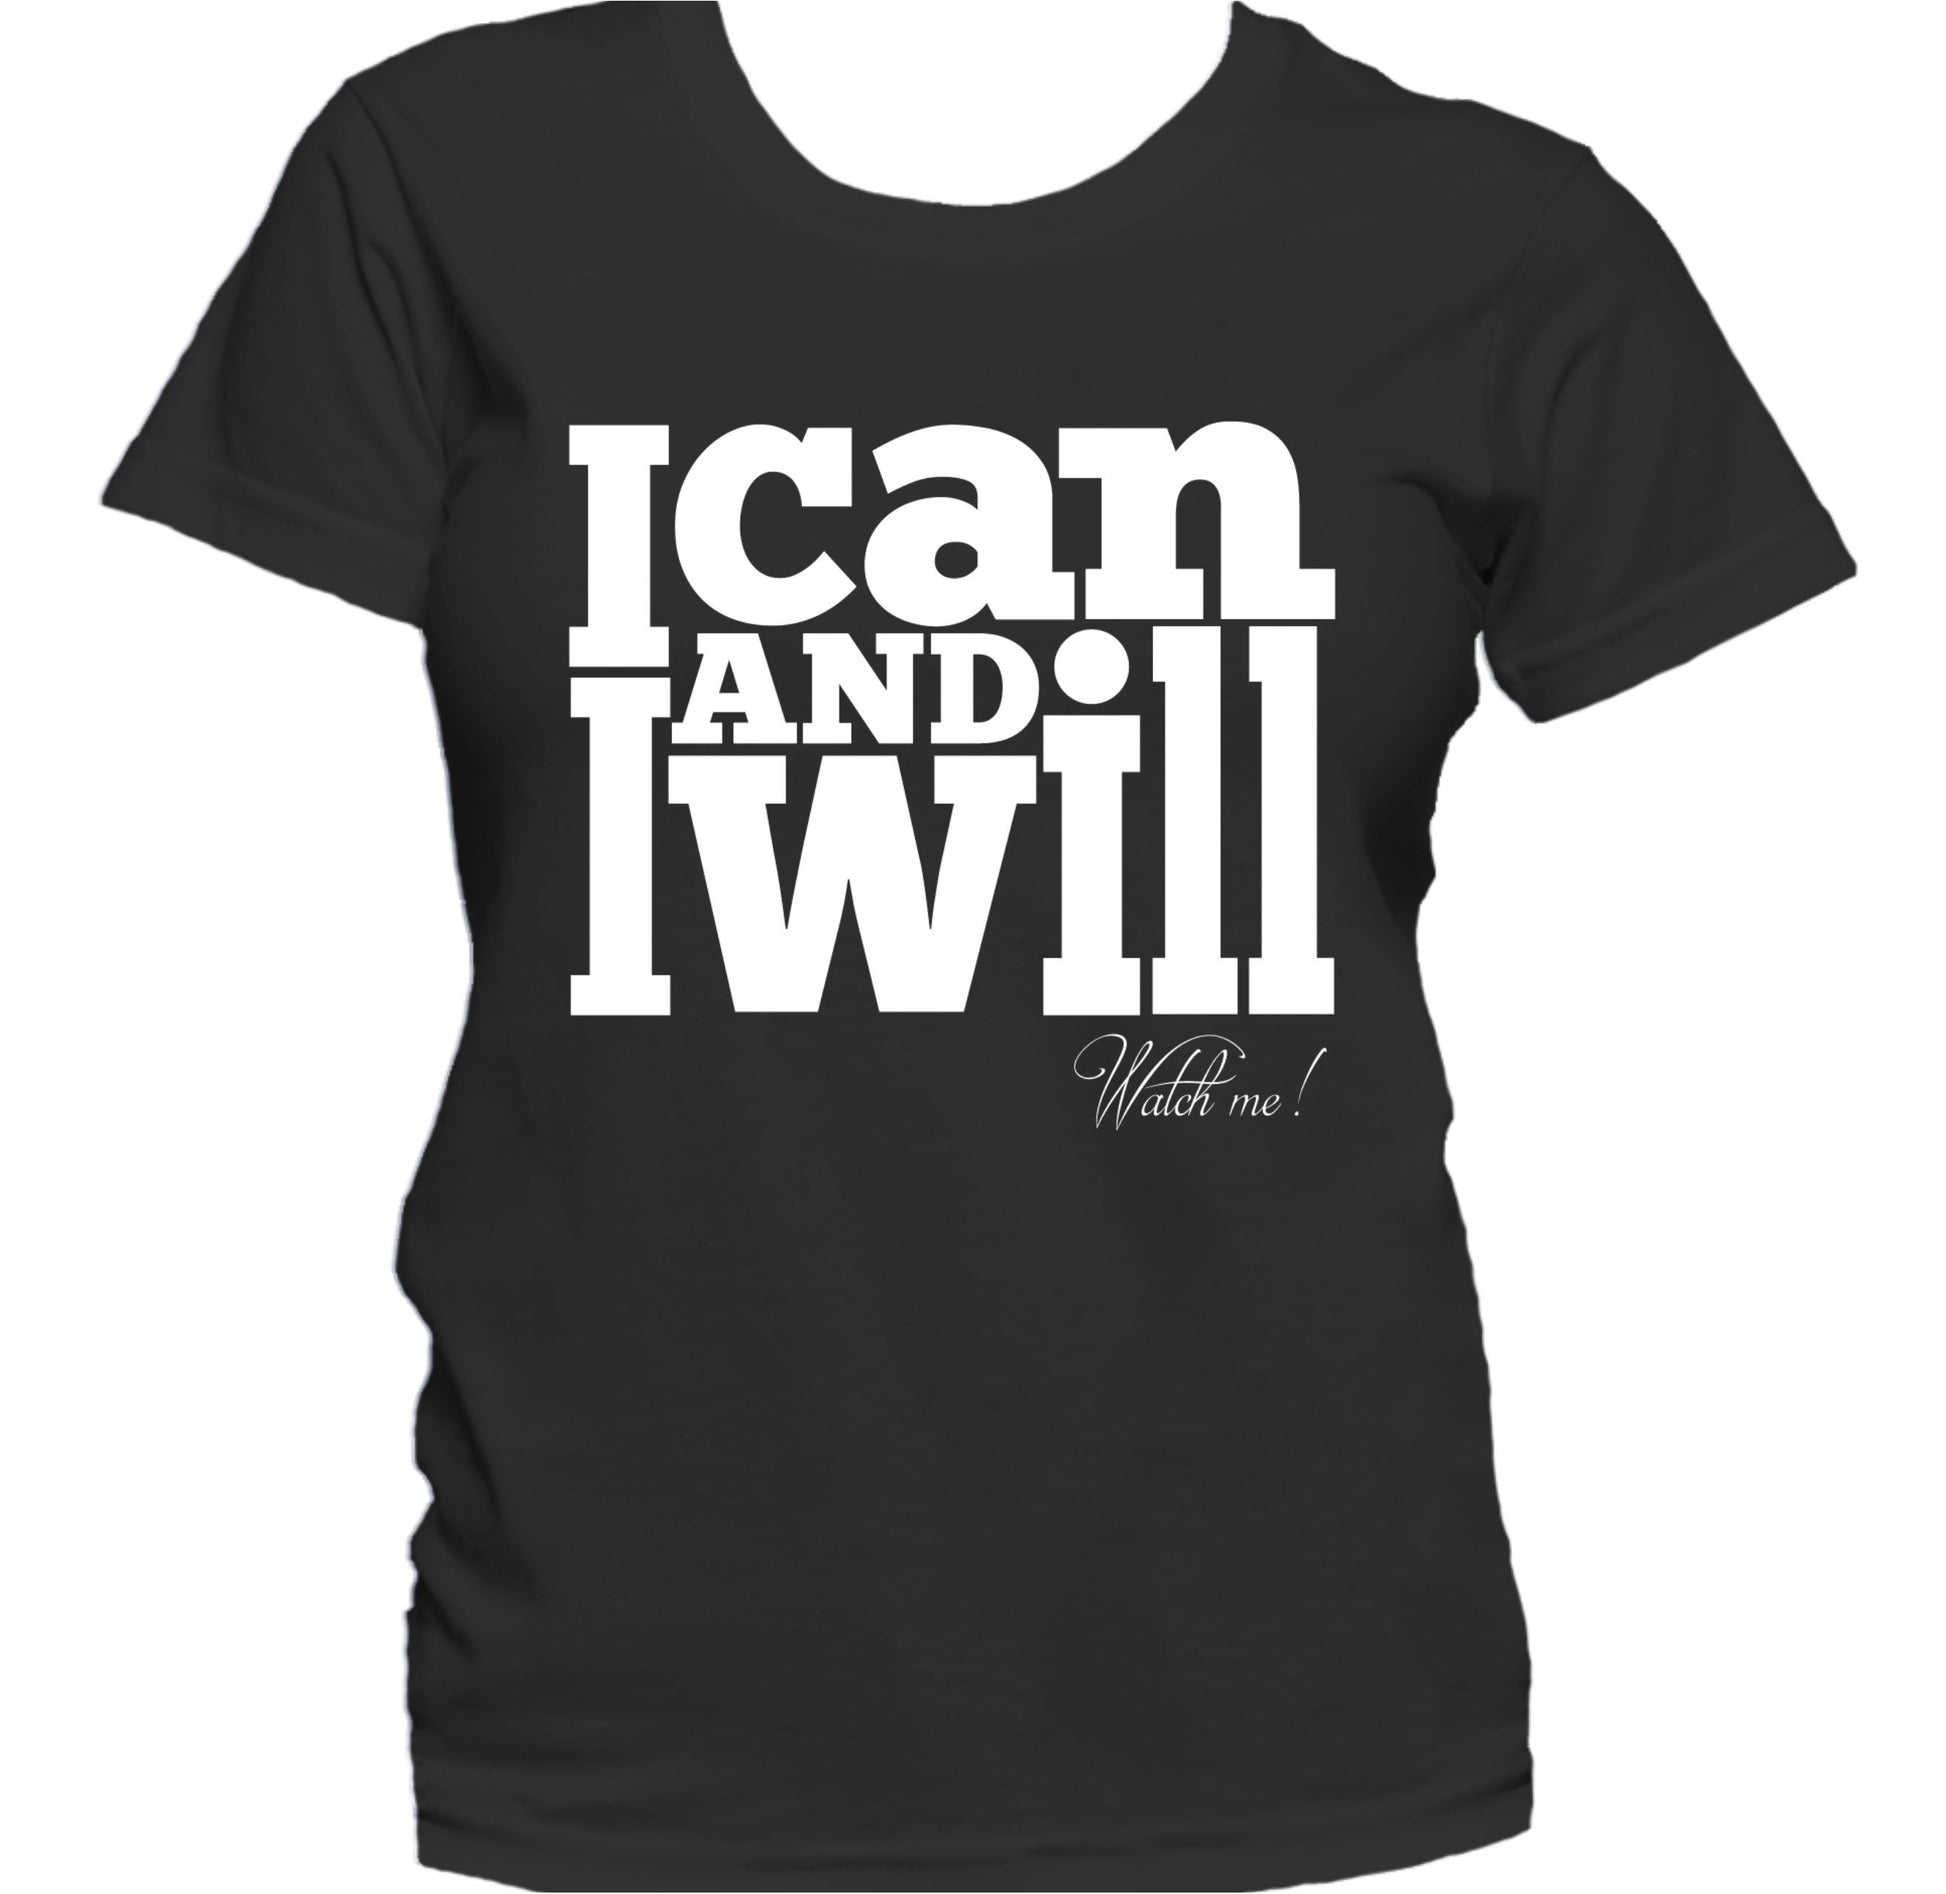 I Can And I Will Motivational Quote Women's T-Shirt